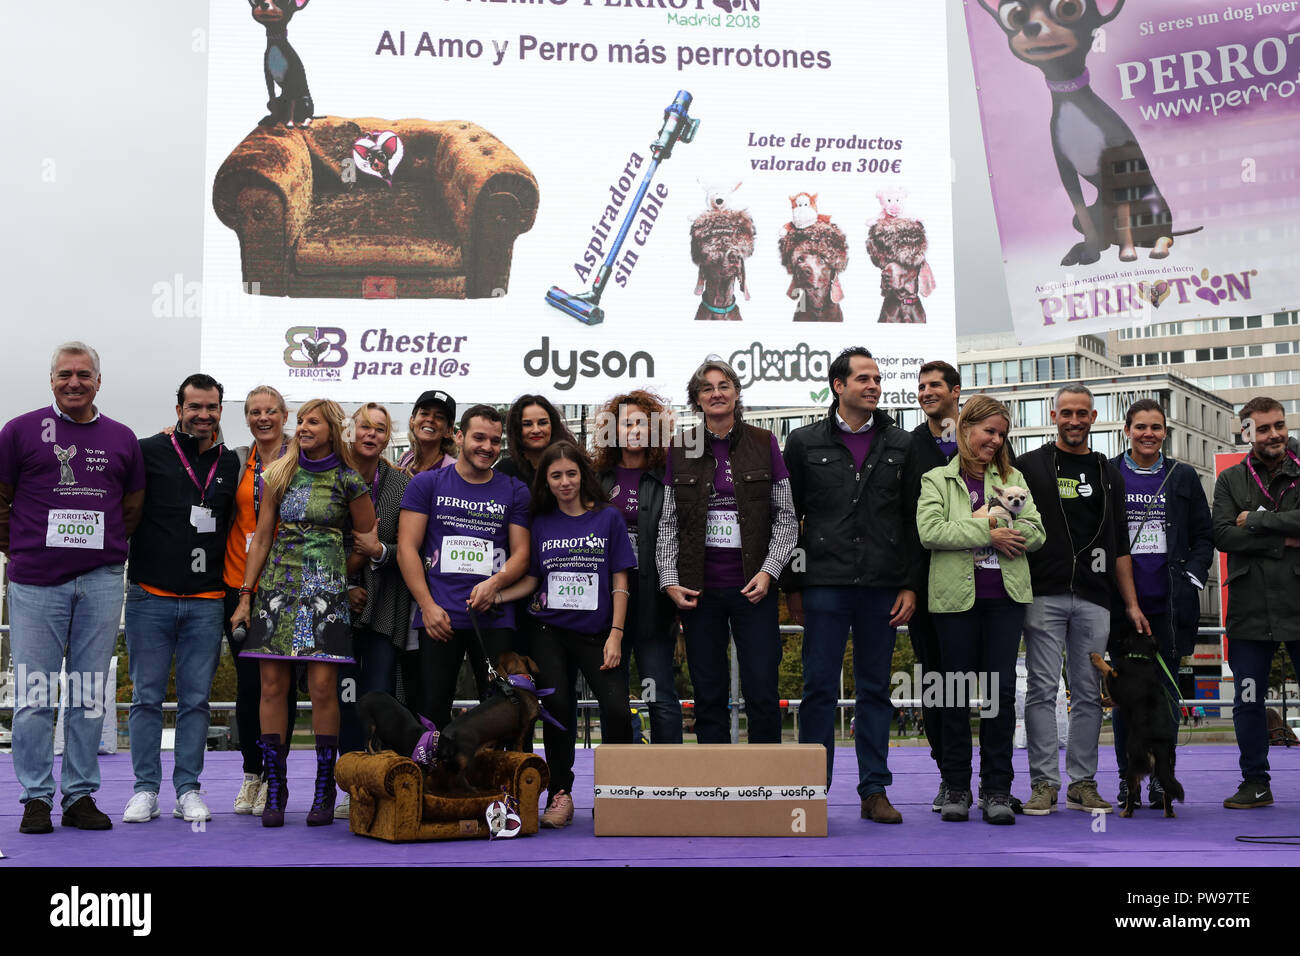 Madrid, Spain. 14th October 2018. Winners and representatives of the event. Perroton Madrid 2018 is the 7th edition of the solidarity race for the adoption and responsible holding of companion animals whose ambassador is the actress and singer Alejandra Botto on Oct 14, 2018 in Madrid, Spain Credit: Jesús Hellin/Alamy Live News Stock Photo